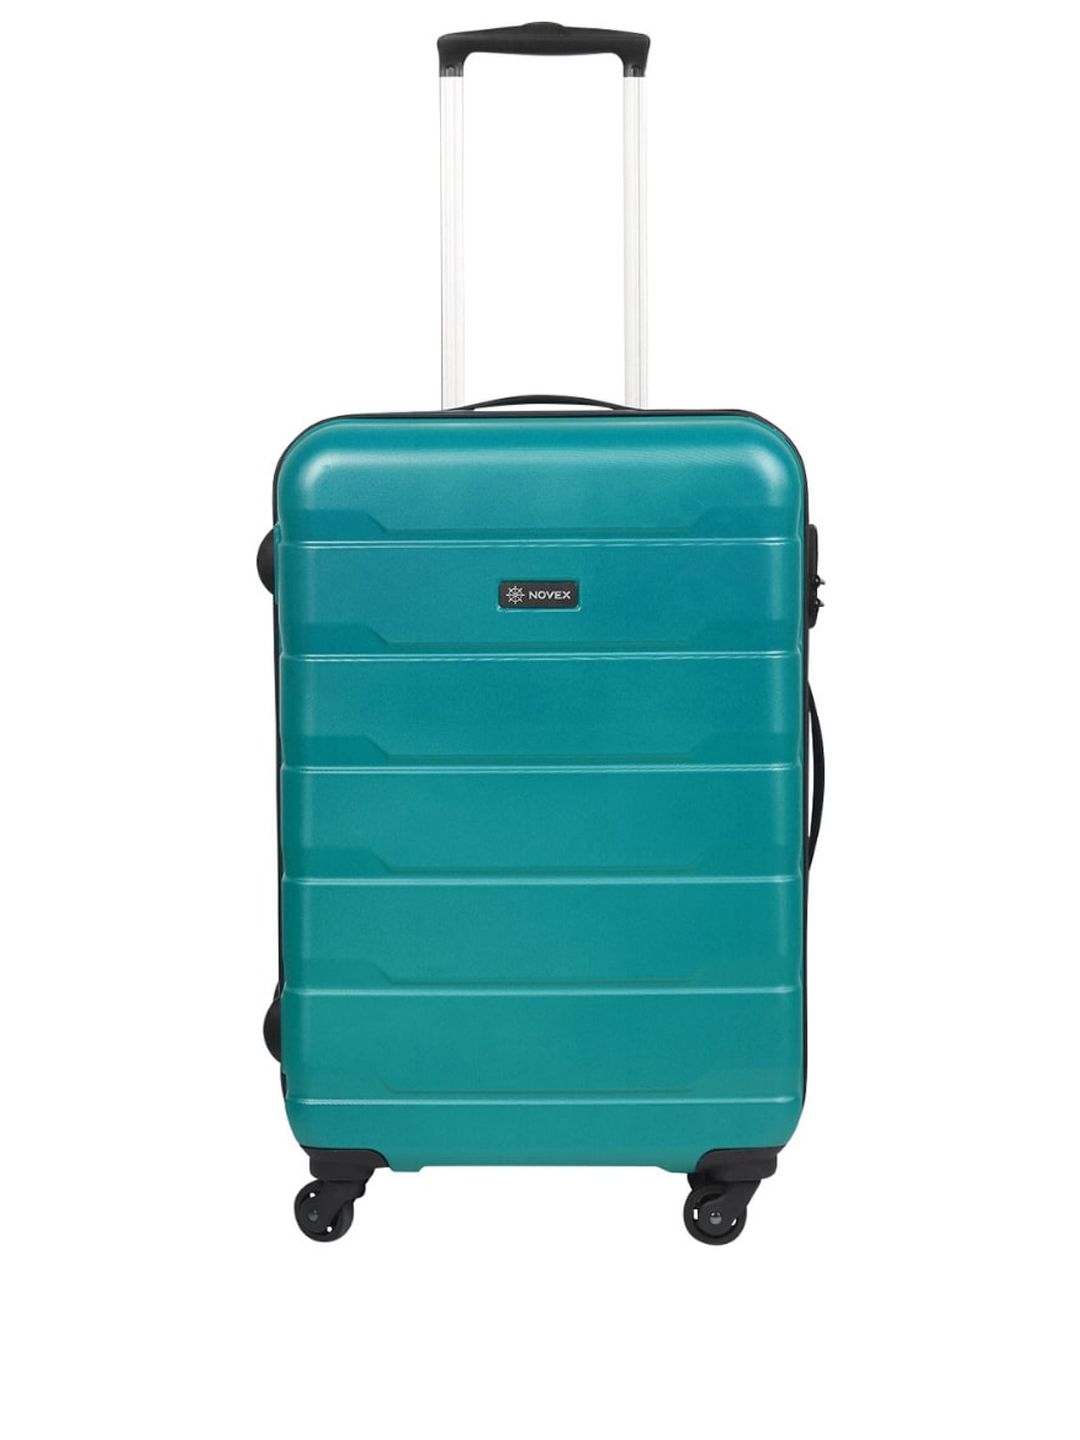 NOVEX Sea-Green Textured Hard-Sided Large Trolley Suitcase Price in India